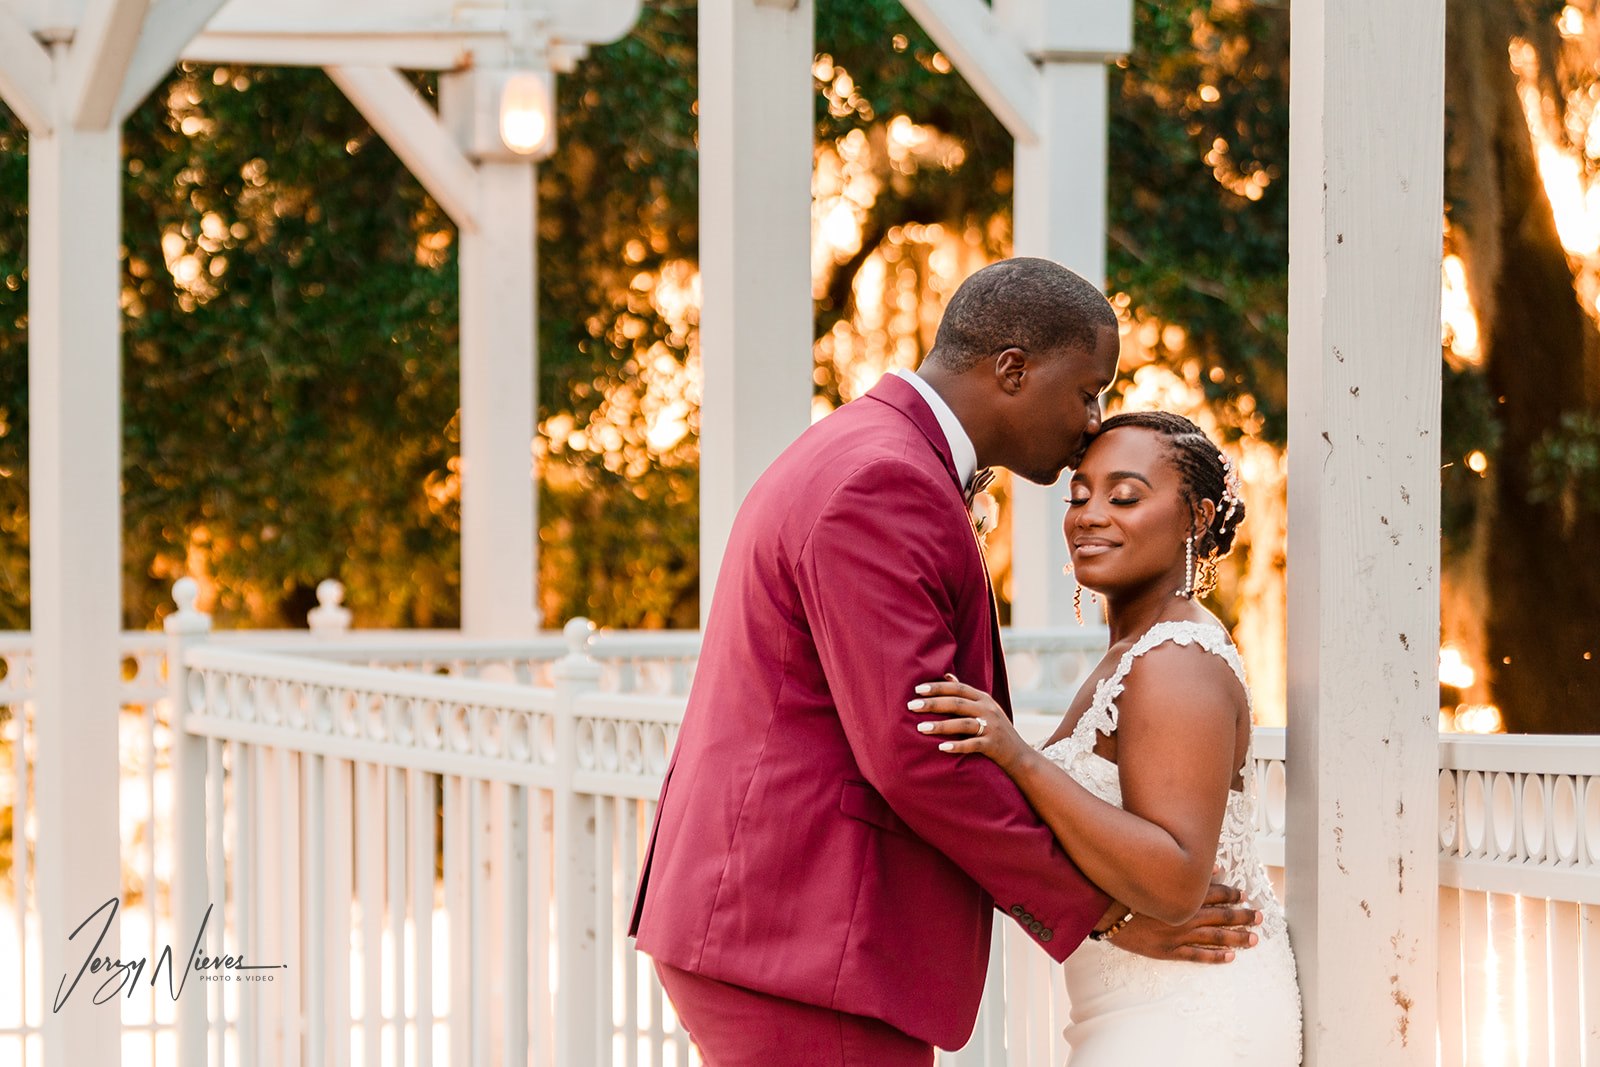 Javon kissing Shelby's forehead against a pillar in the outdoor walkway at Lake Mary Event Center.